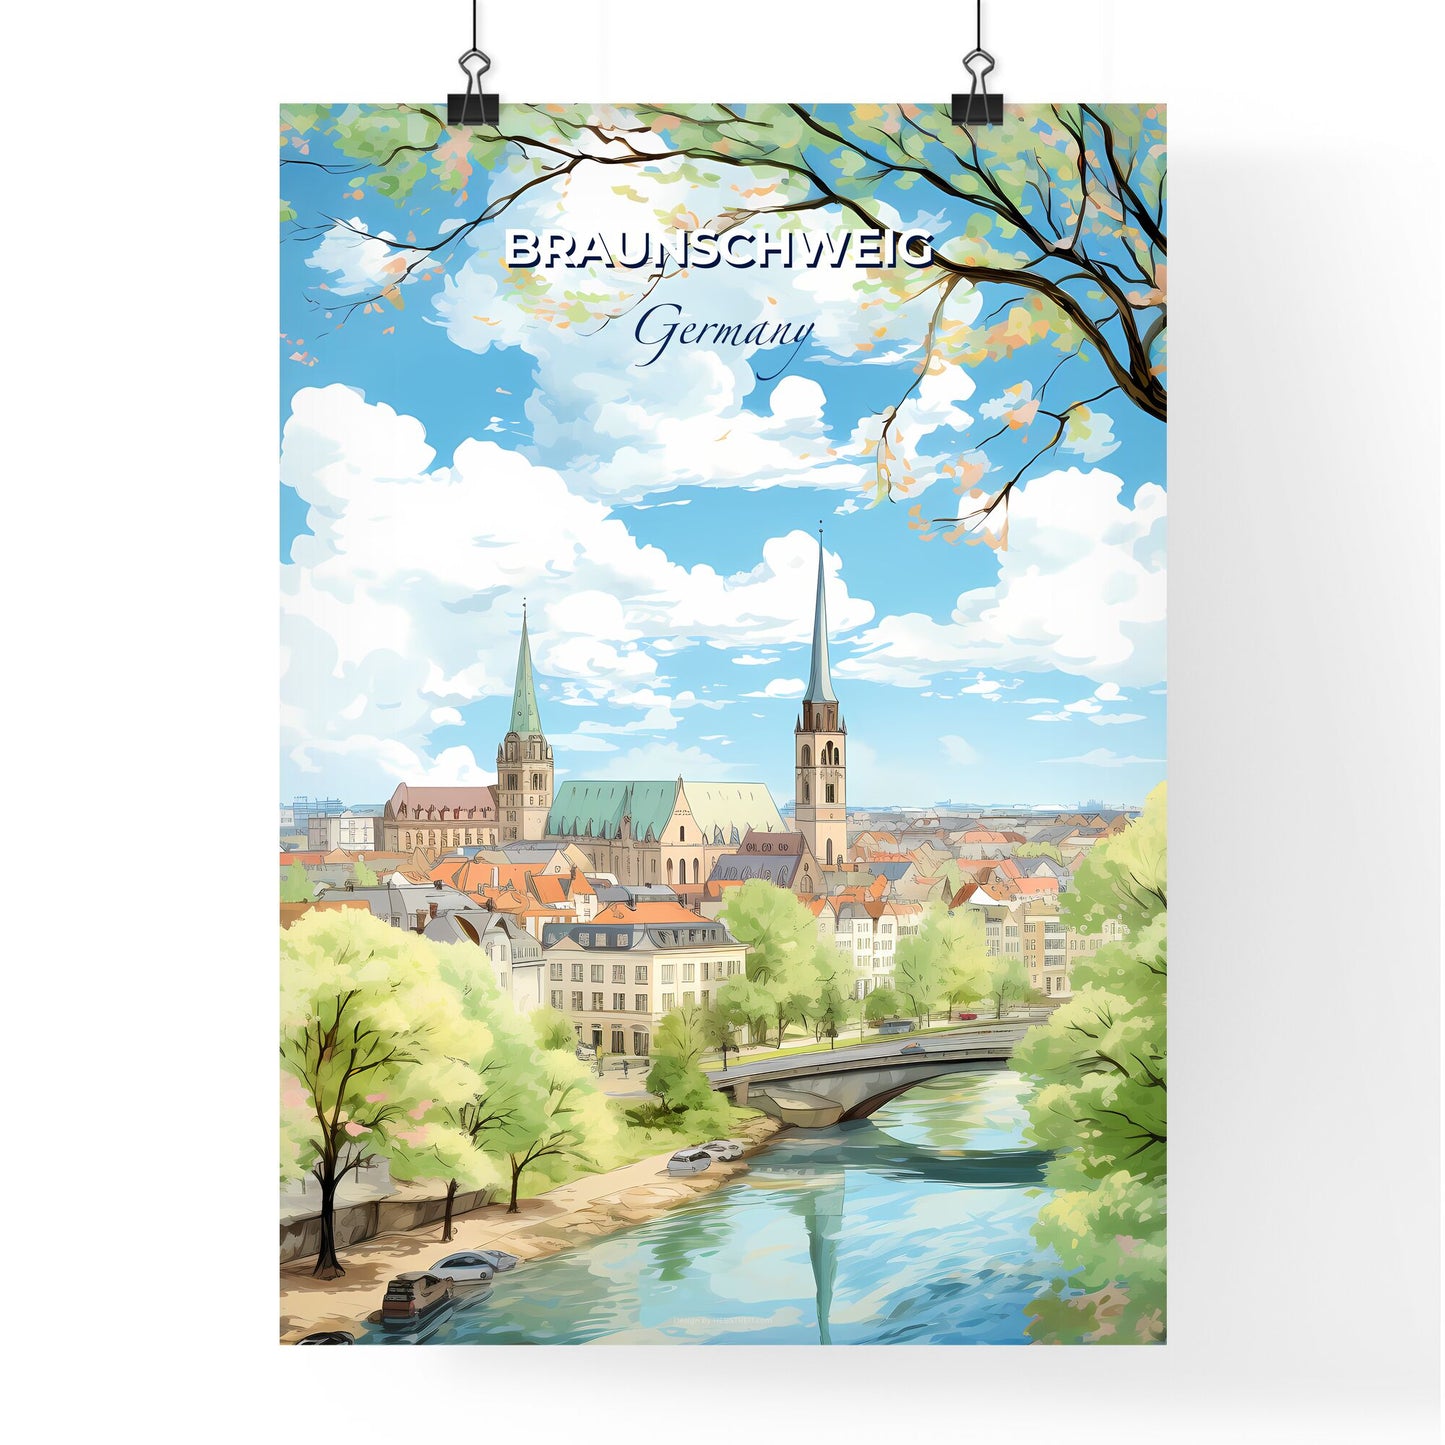 Braunschweig Germany Skyline - A City With A Bridge And Trees - Customizable Travel Gift Default Title